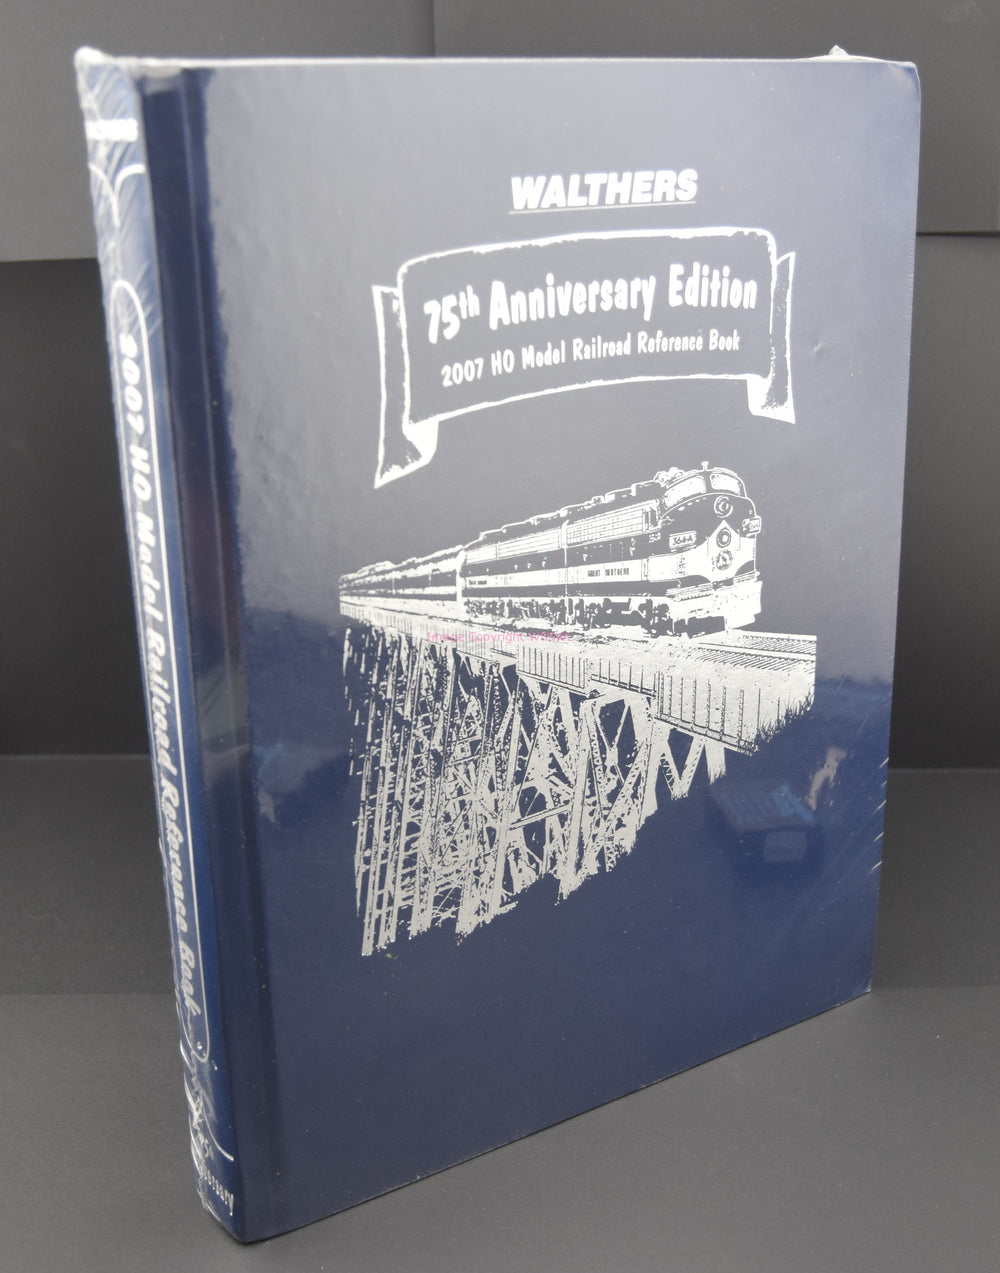 Walthers Hardbound 75th Anniversary 2007 HO Model Railroad Reference Book - Dave's Hobby Shop by W5SWL